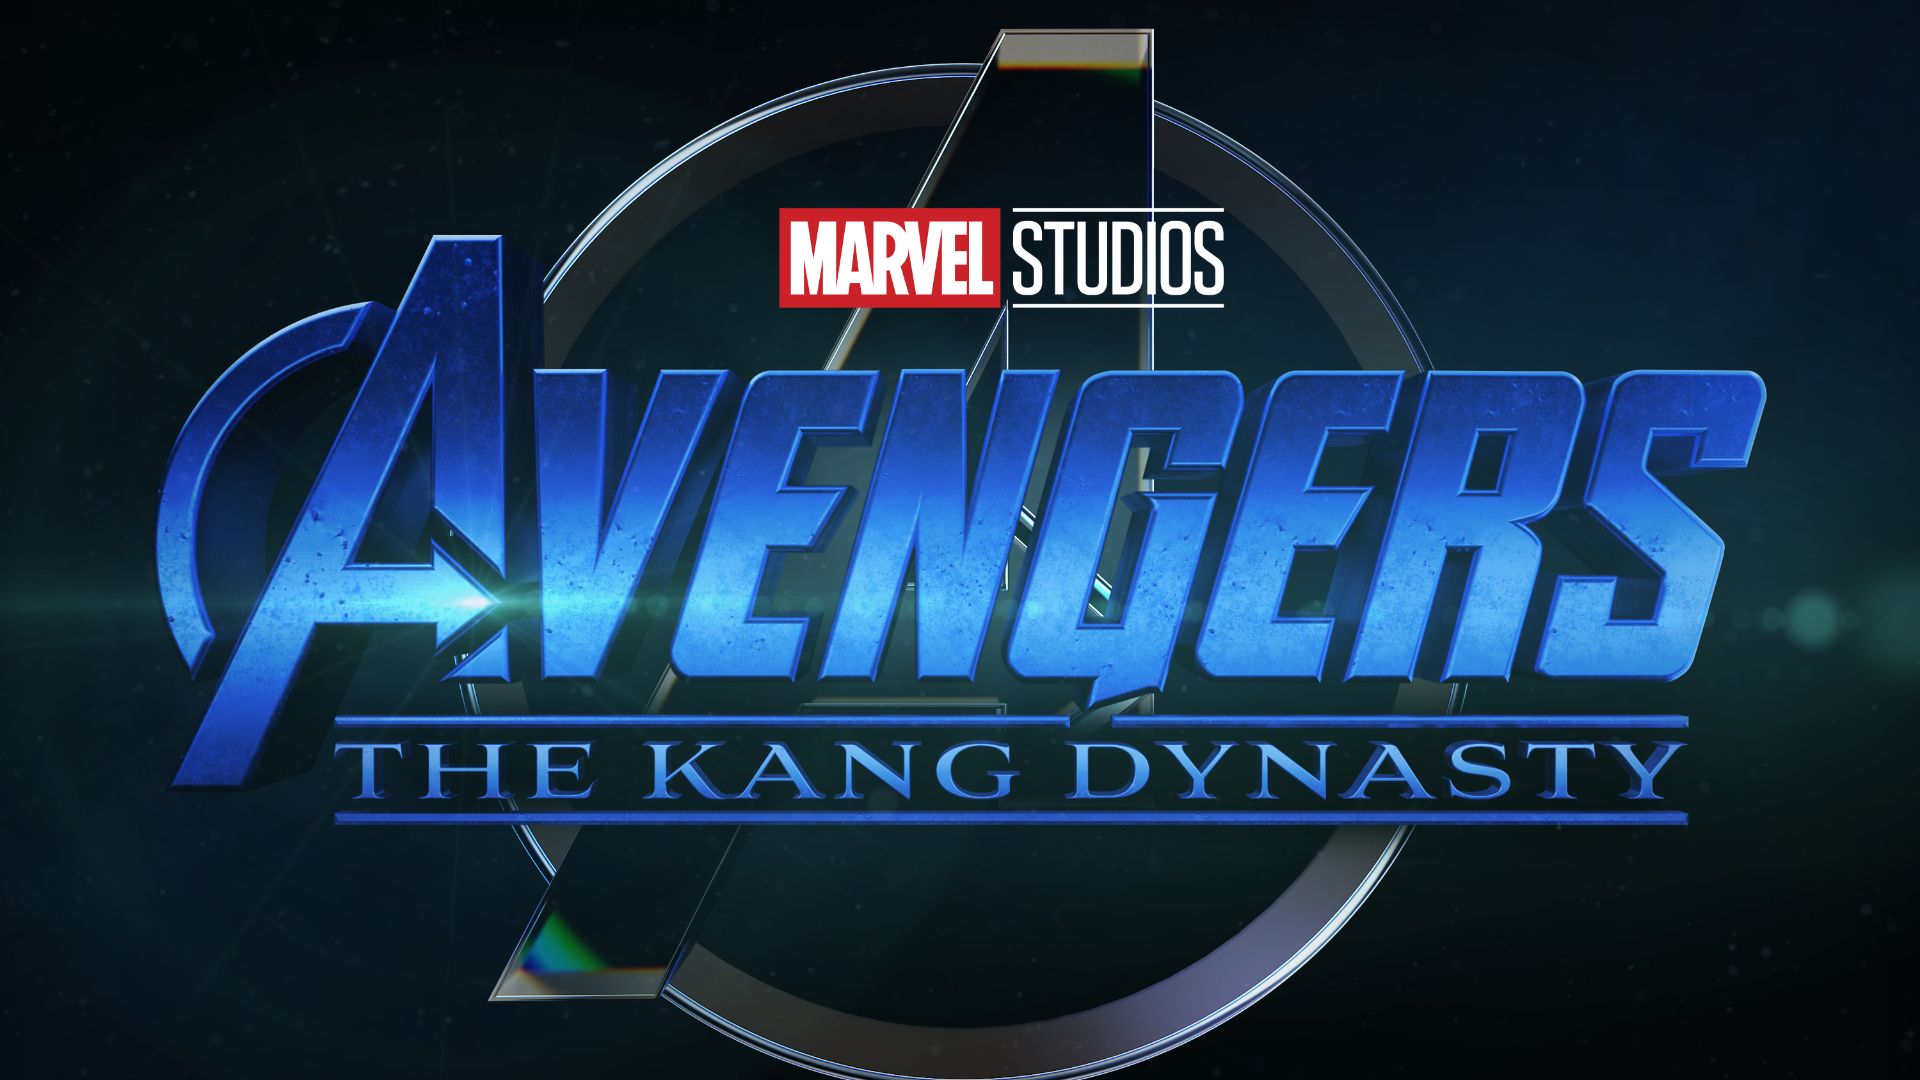 Avengers: The Kang Dynasty's director announced — The Independent News